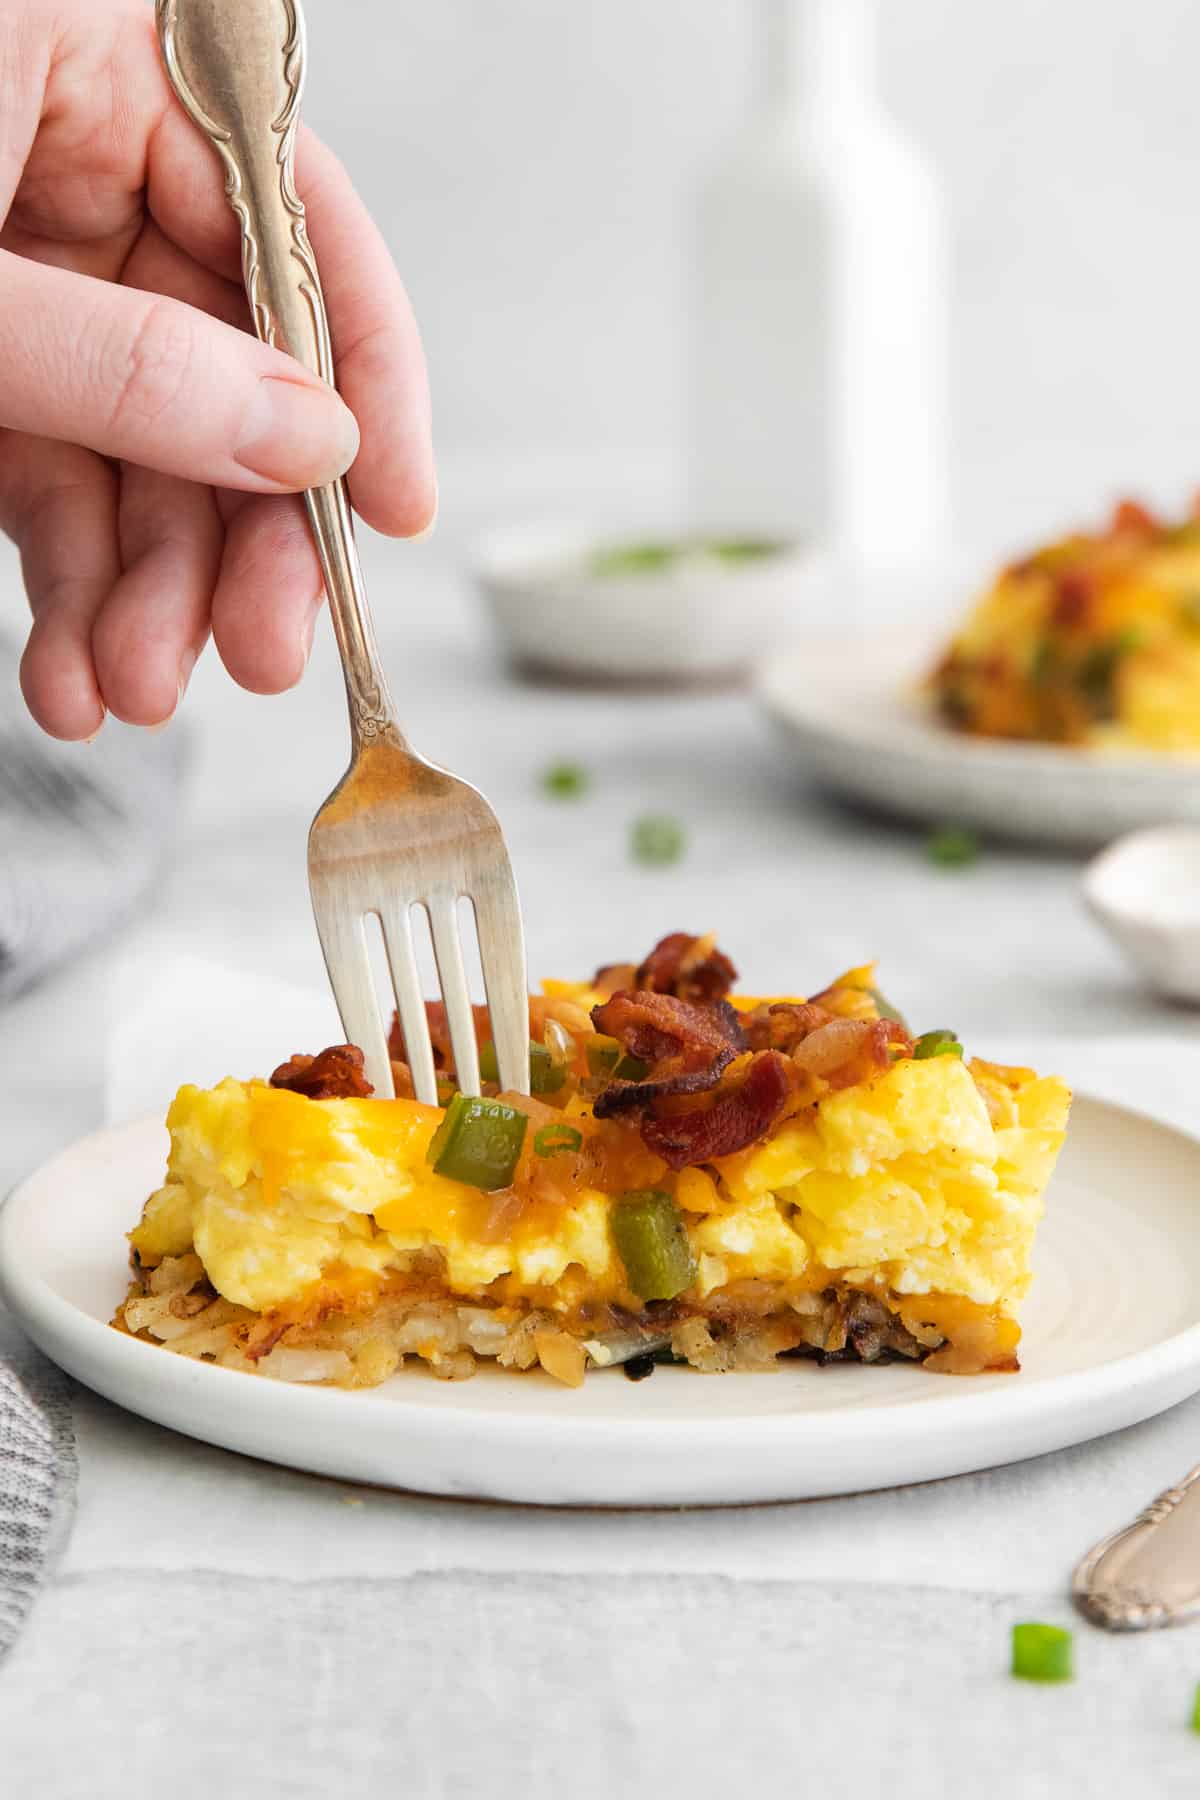 Slice of breakfast pizza on a plate with a fork.